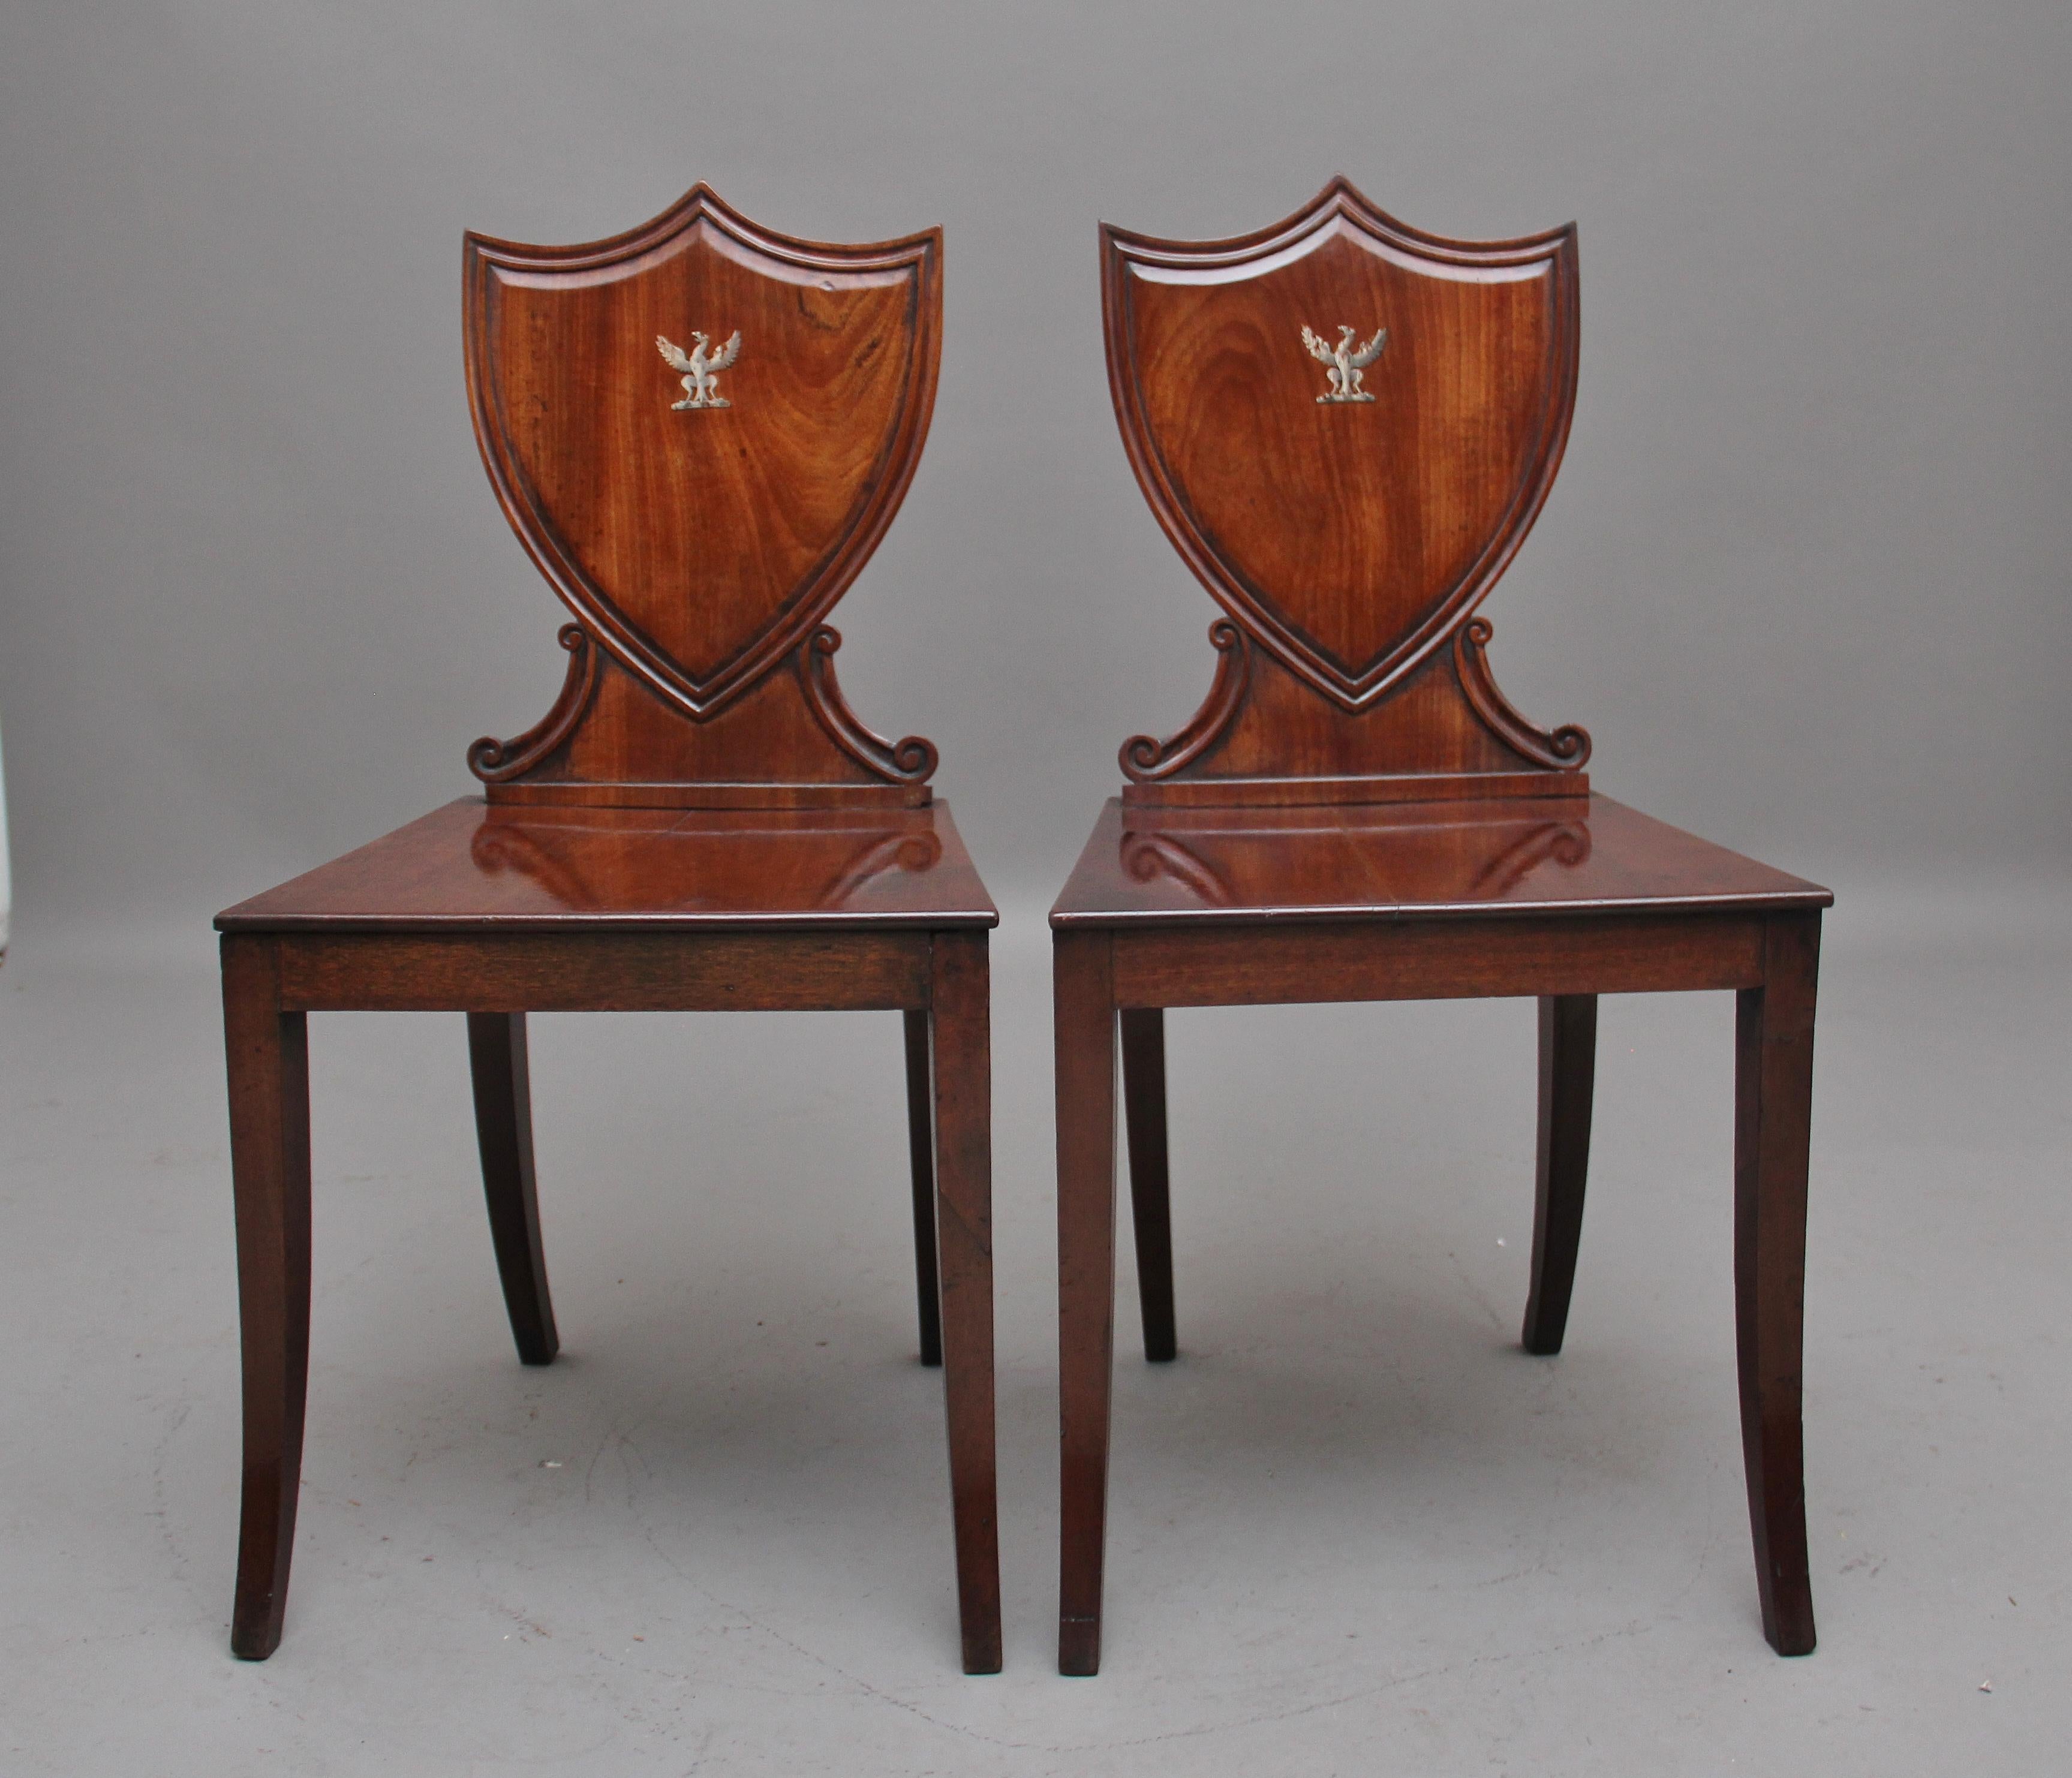 A pair of early 19th century mahogany hall chairs, having a shield back with a nice moulded edge, with a griffin emblem at the centre of the shield, leading down to a shaped scroll support onto the hard wood seat, supported on swept rear and front